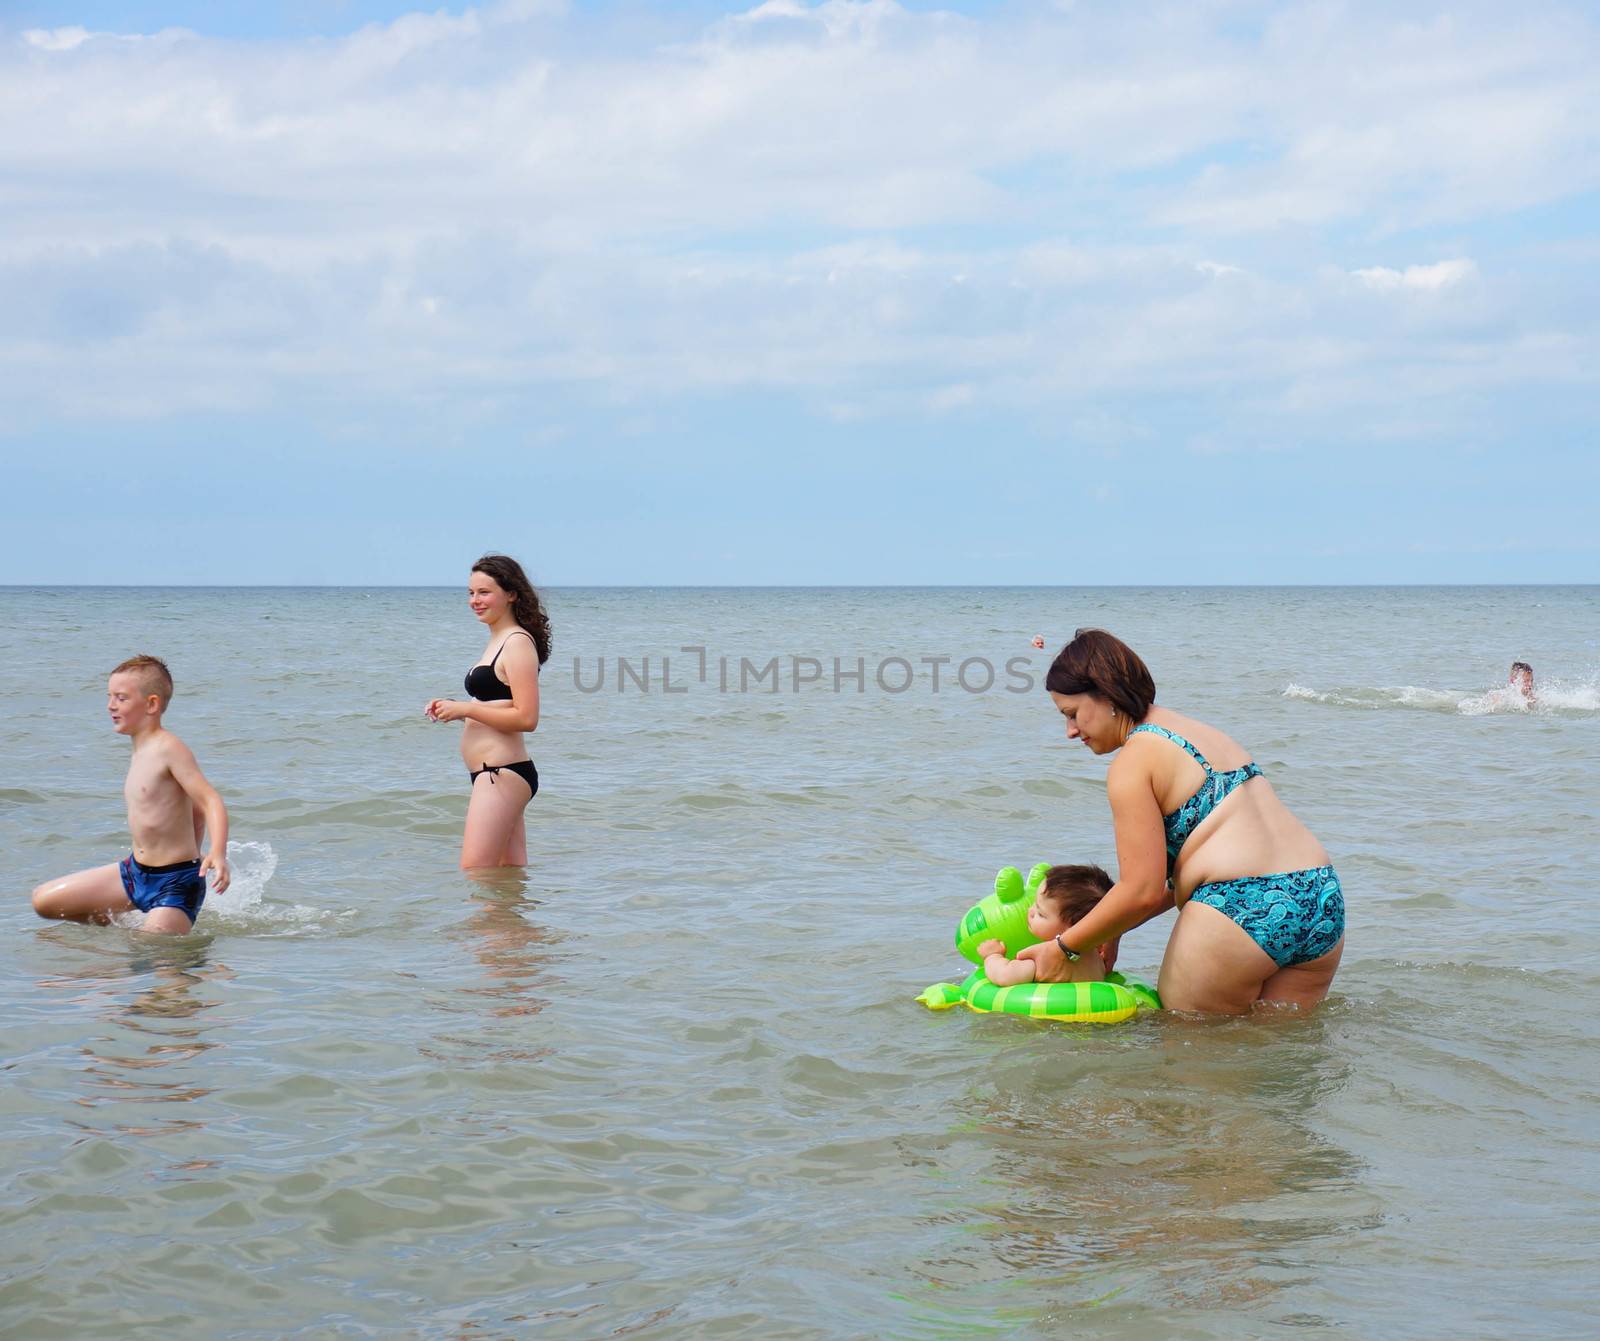 SIANOZETY, POLAND - JULY 21, 2015: Adults and children playing in the water at a beach